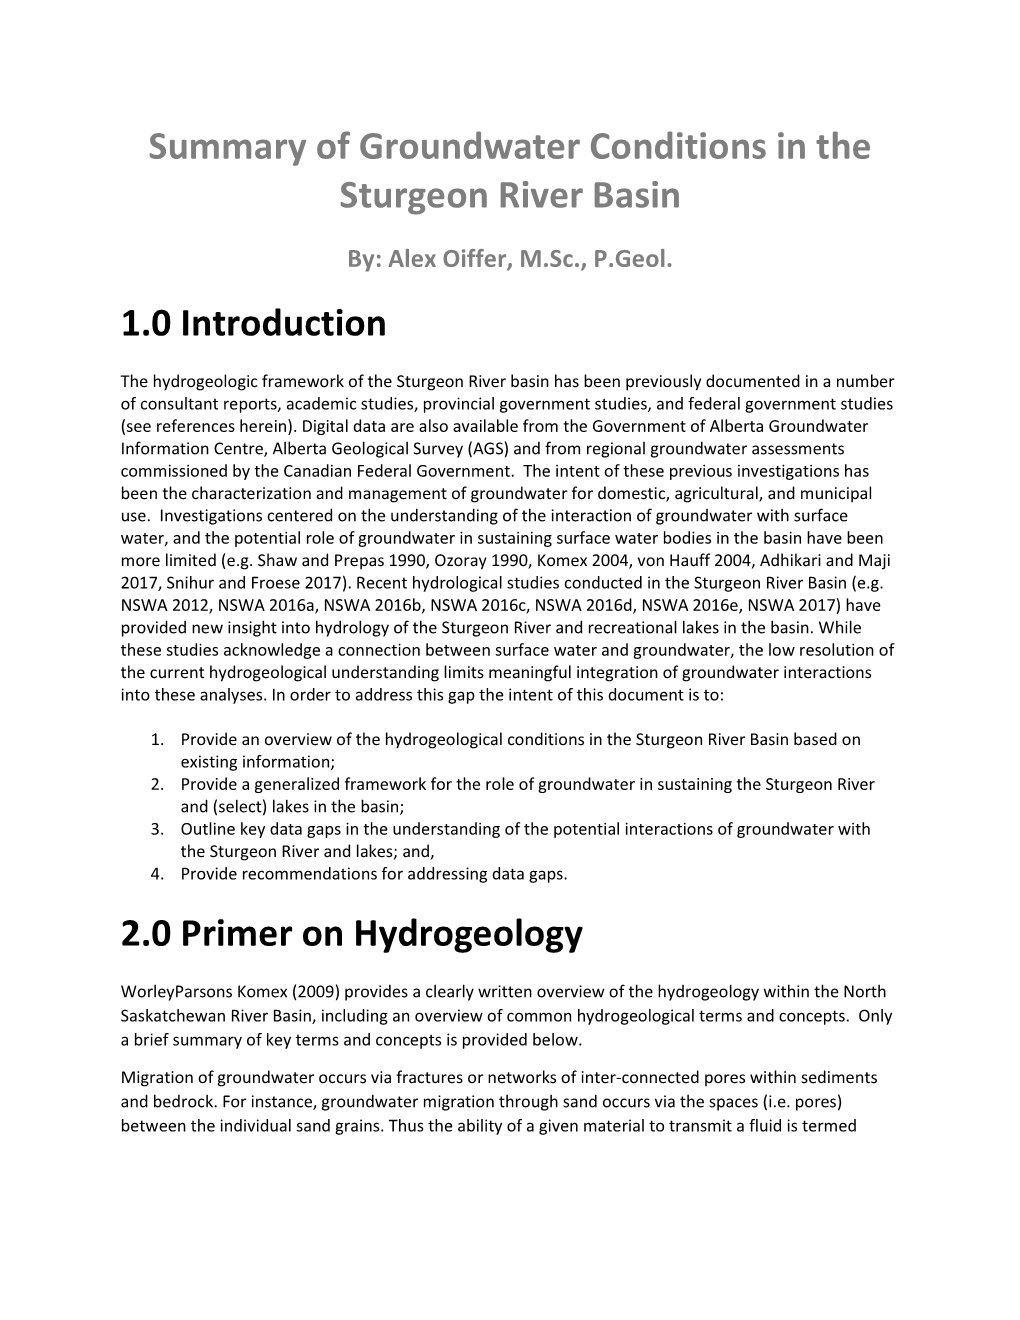 Summary of Groundwater Conditions in the Sturgeon River Basin 1.0 Introduction 2.0 Primer on Hydrogeology